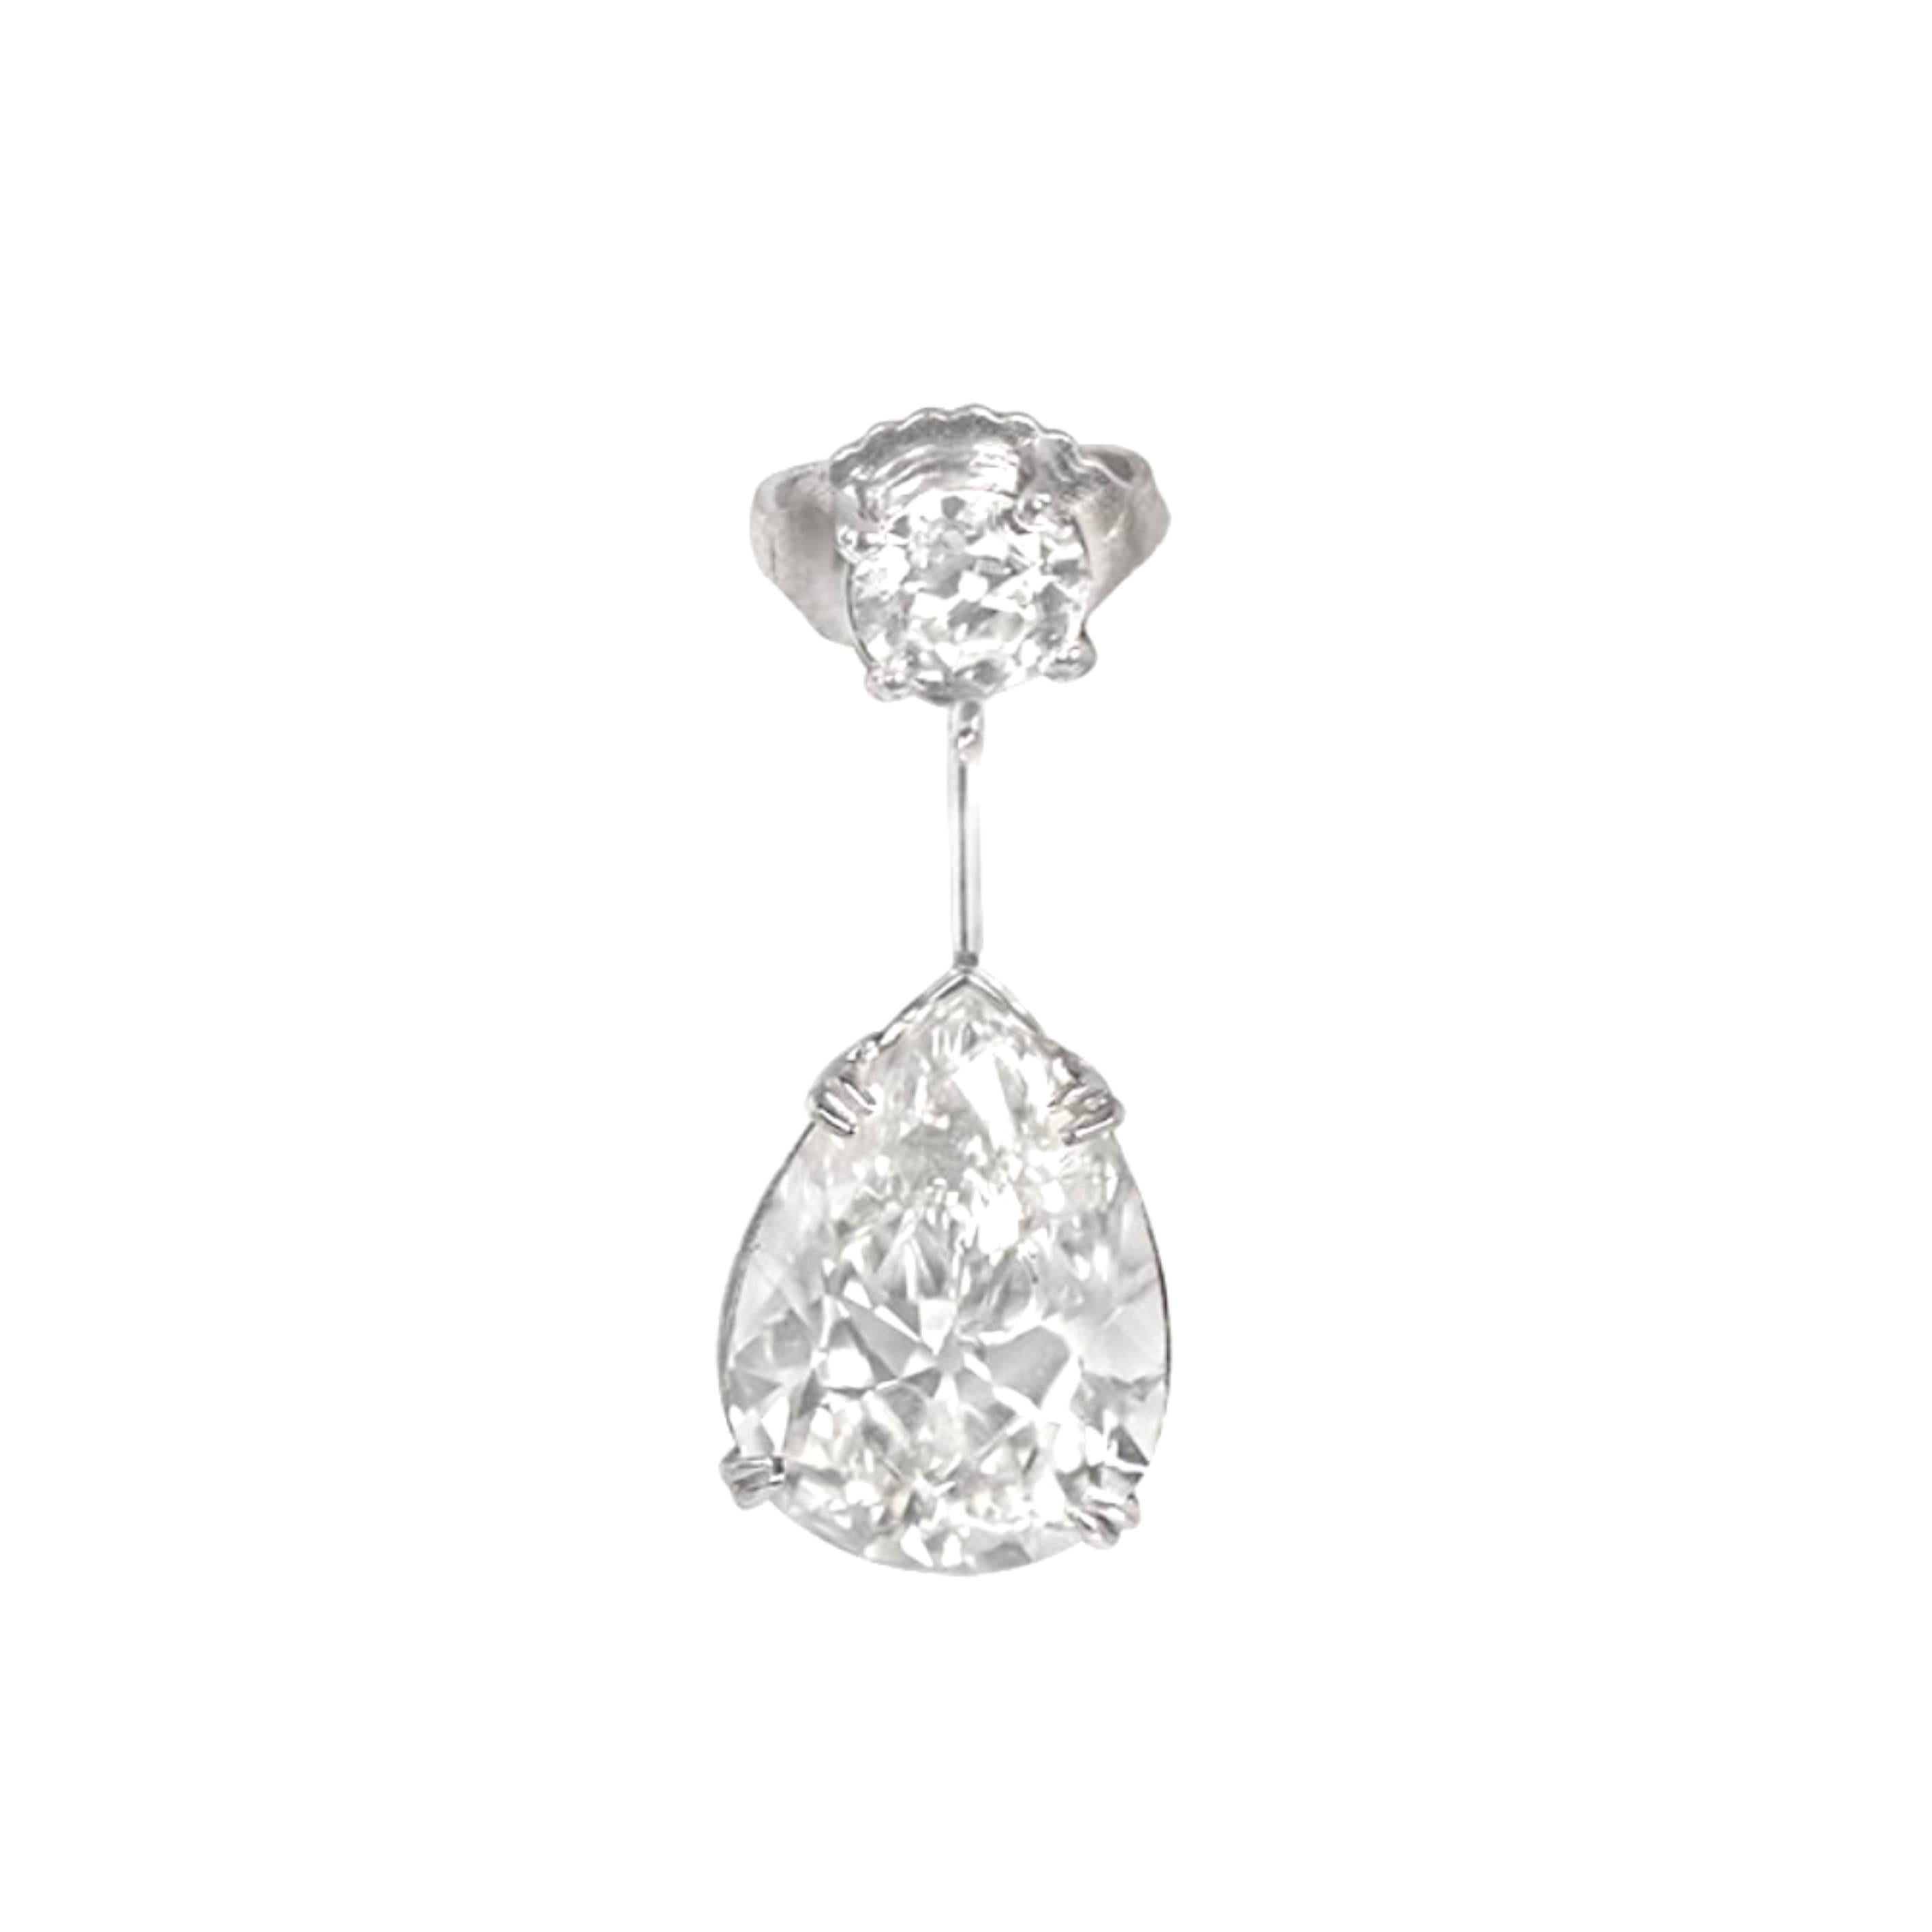 Indulge in the magnificence of our Exquisite platinum drop earrings, featuring prong-set pear-shaped diamonds. These earrings exude an aura of luxury and sophistication. The earring studs highlight smaller old European cut diamonds, delicately set